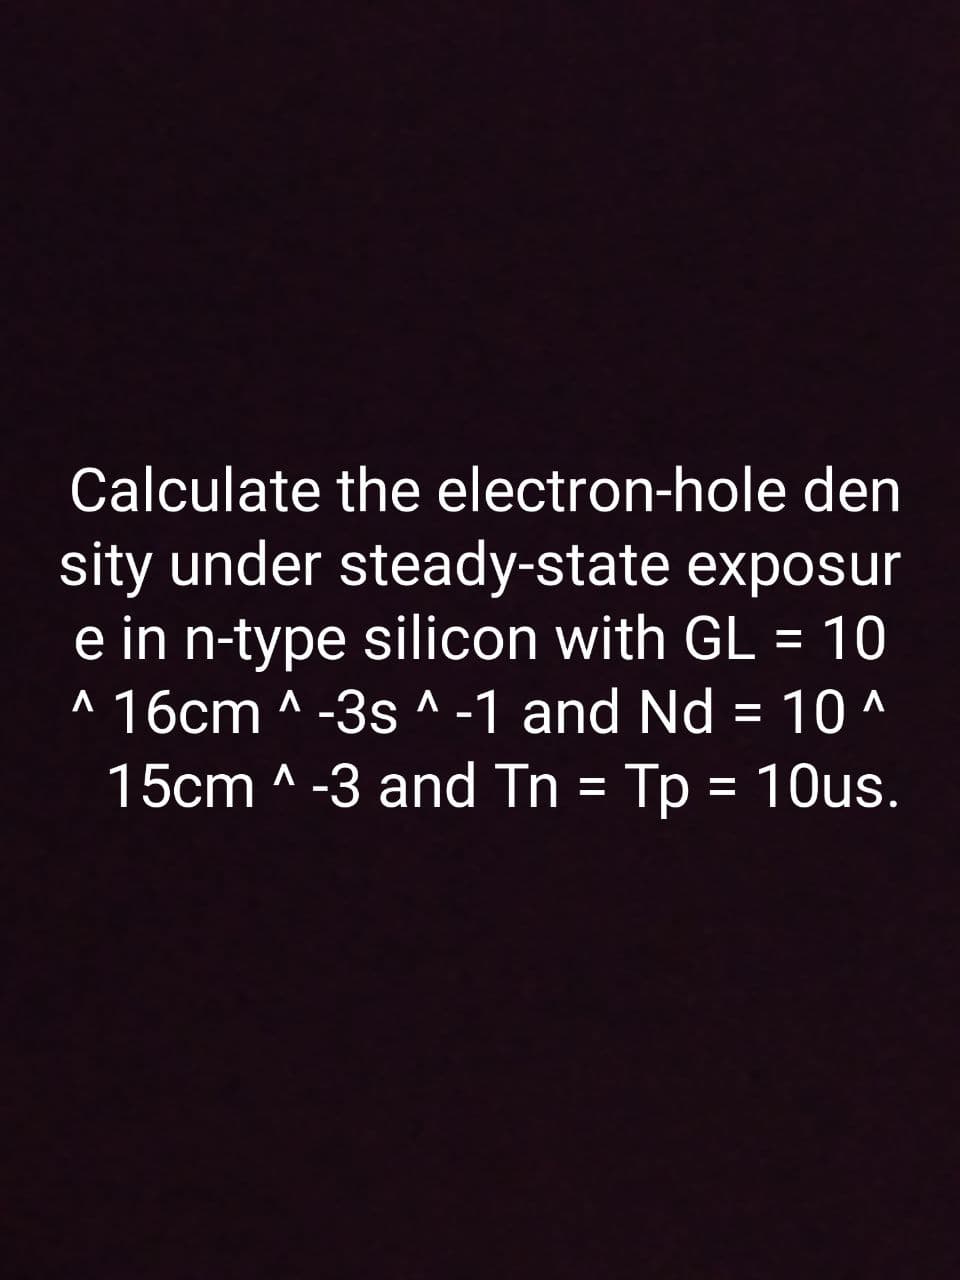 Calculate the electron-hole den
sity under steady-state exposur
e in n-type silicon with GL = 10
^ 16cm ^ -3s ^ -1 and Nd = 10 ^
15cm ^ -3 and Tn = Tp = 10us.
%3D
%3D
